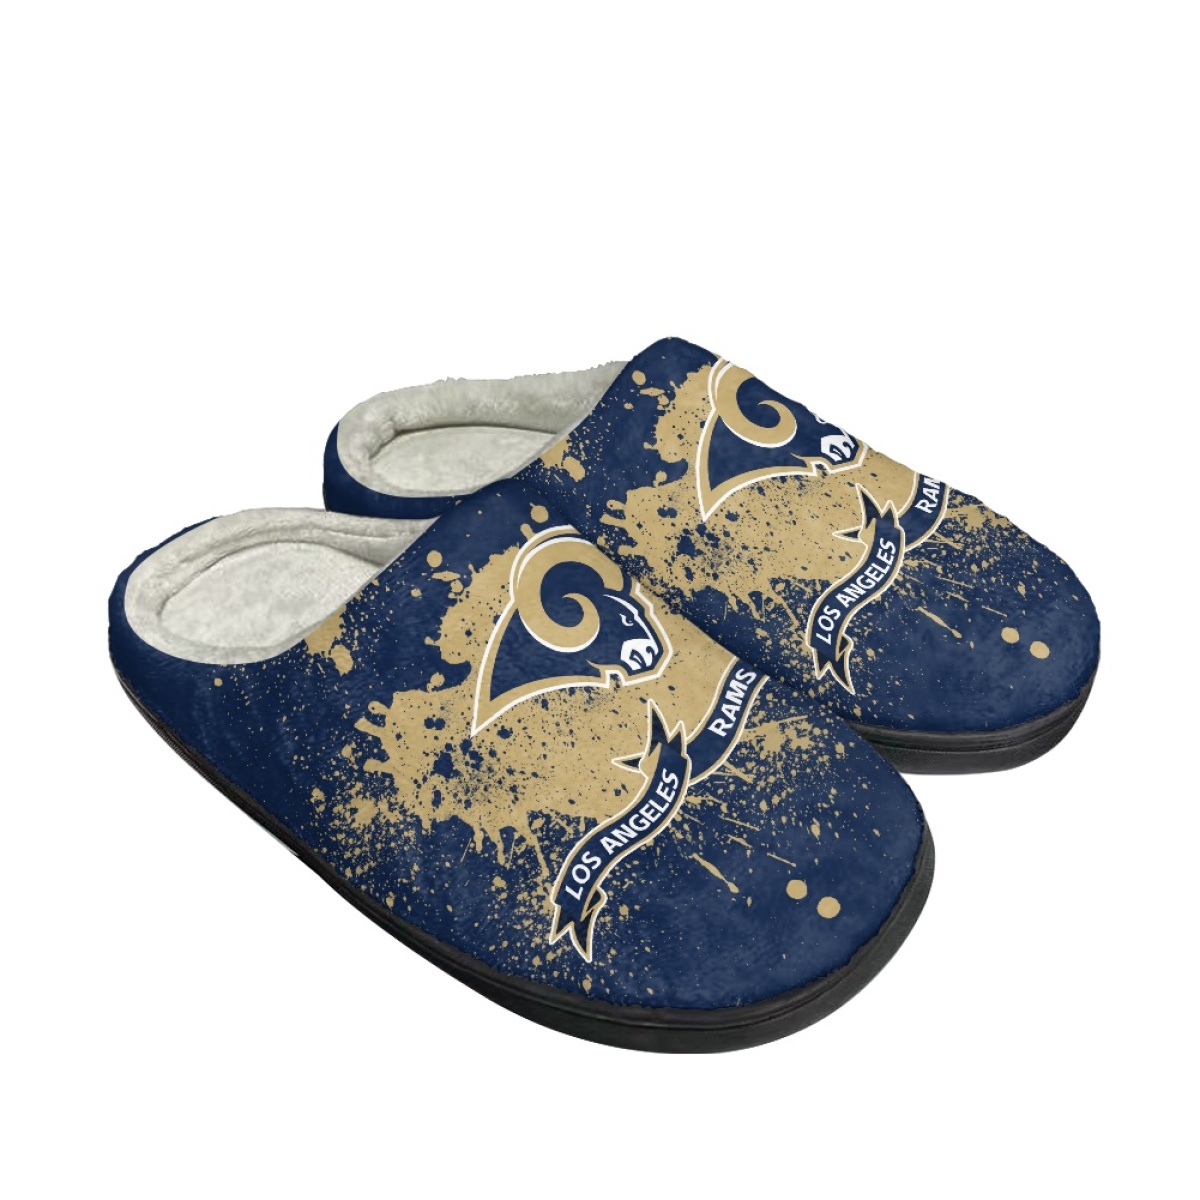 Women's Los Angeles Rams Slippers/Shoes 006